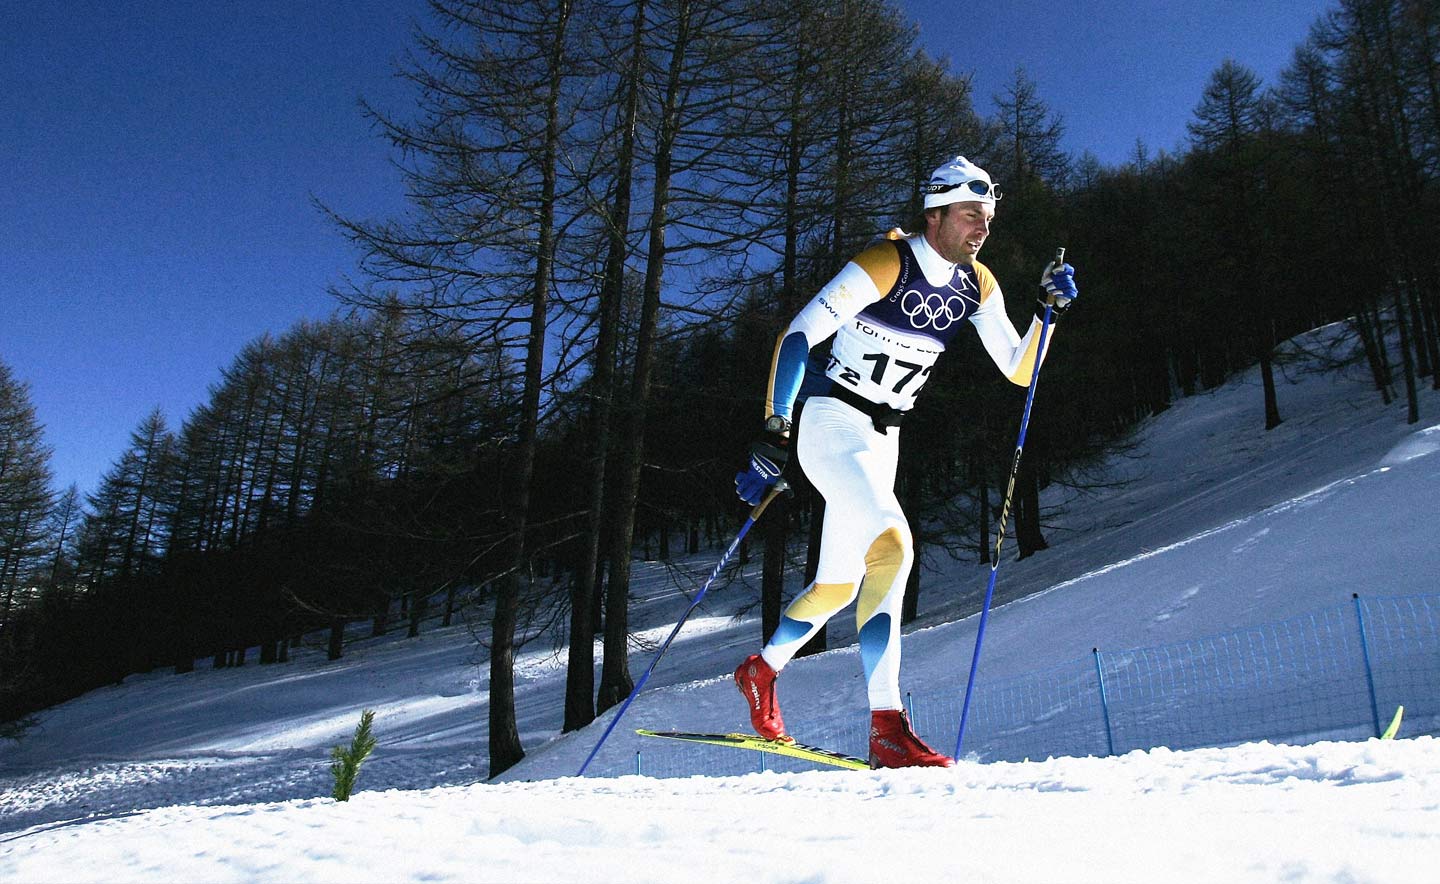 User Peter Larsson of Sweden practices in the Cross Country Skiing training